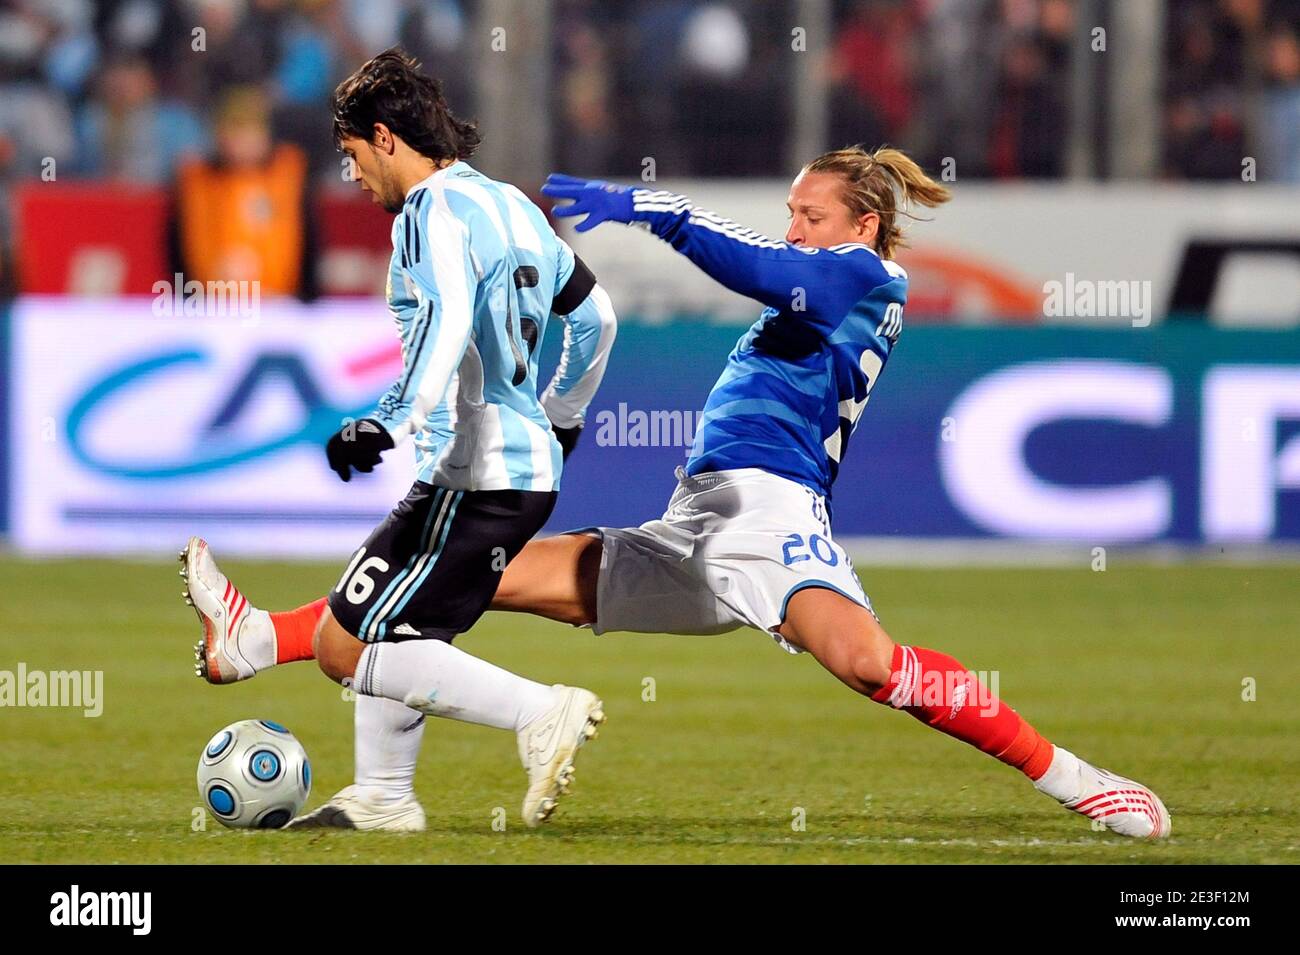 Argentina's Sergio Aguero and France's Philippe Mexes during the International Friendly Soccer match, France vs Argentina at the velodrome Stadium in Marseille, France on February 11, 2009. Argentina won 2-0. Photo by Stephane Reix/ABACAPRESS.COM Stock Photo